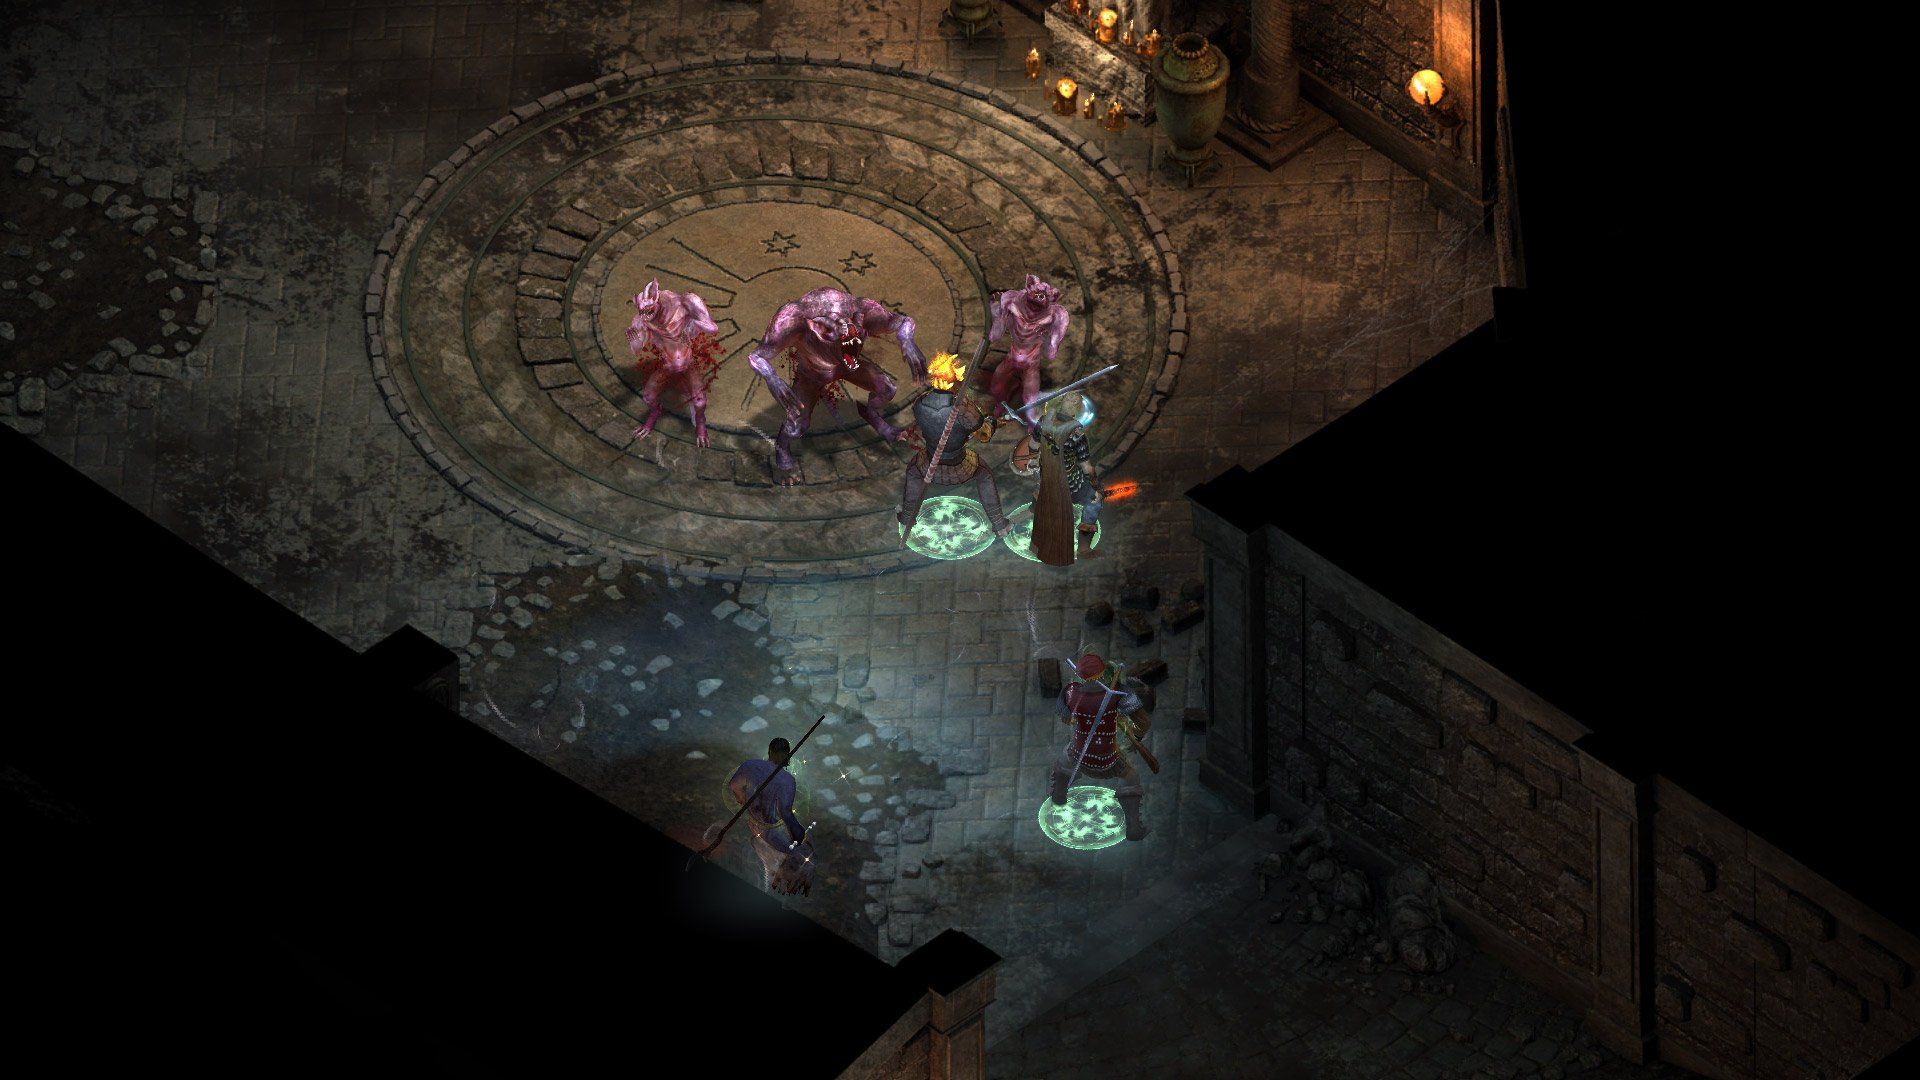 Pillars of Eternity: Definitive Edition for ipod instal